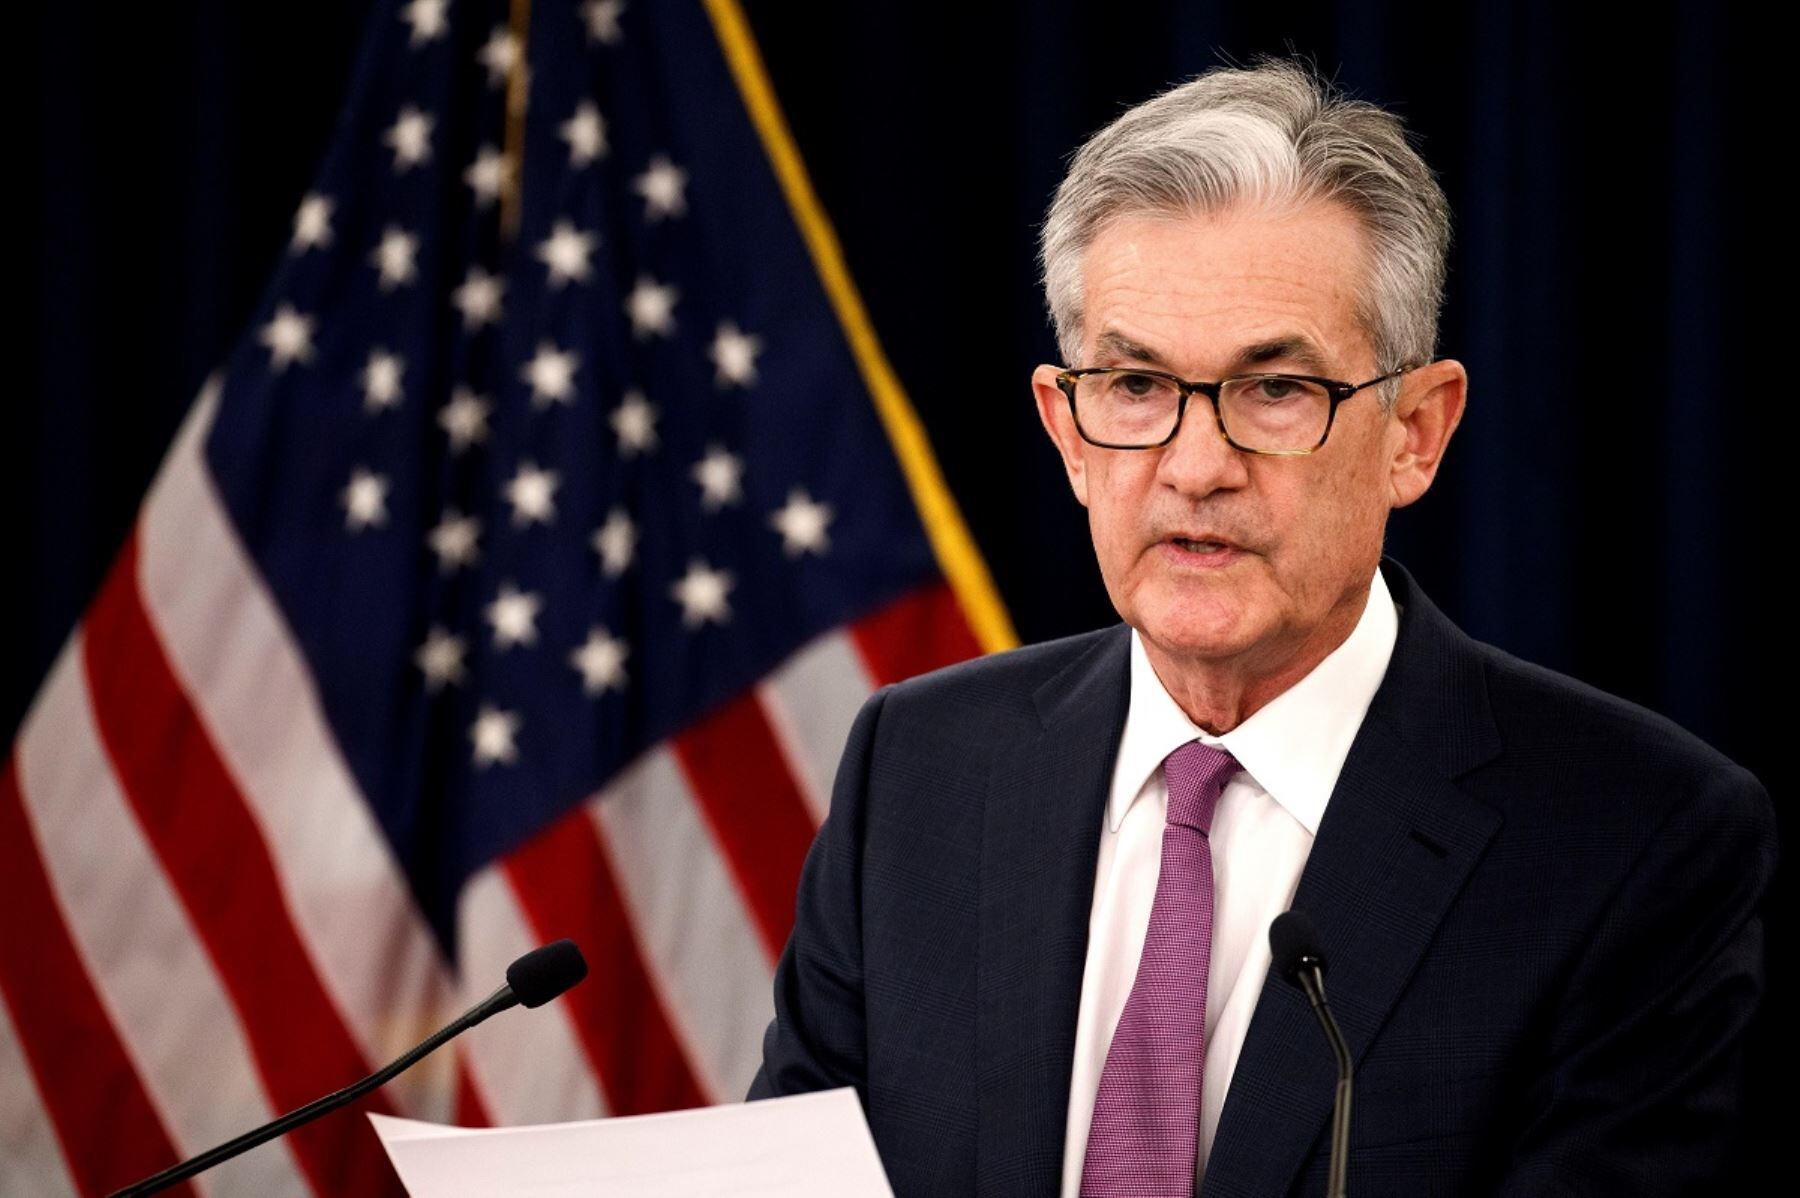 US economy continues to overcome pandemic impact, says Fed’s Powell